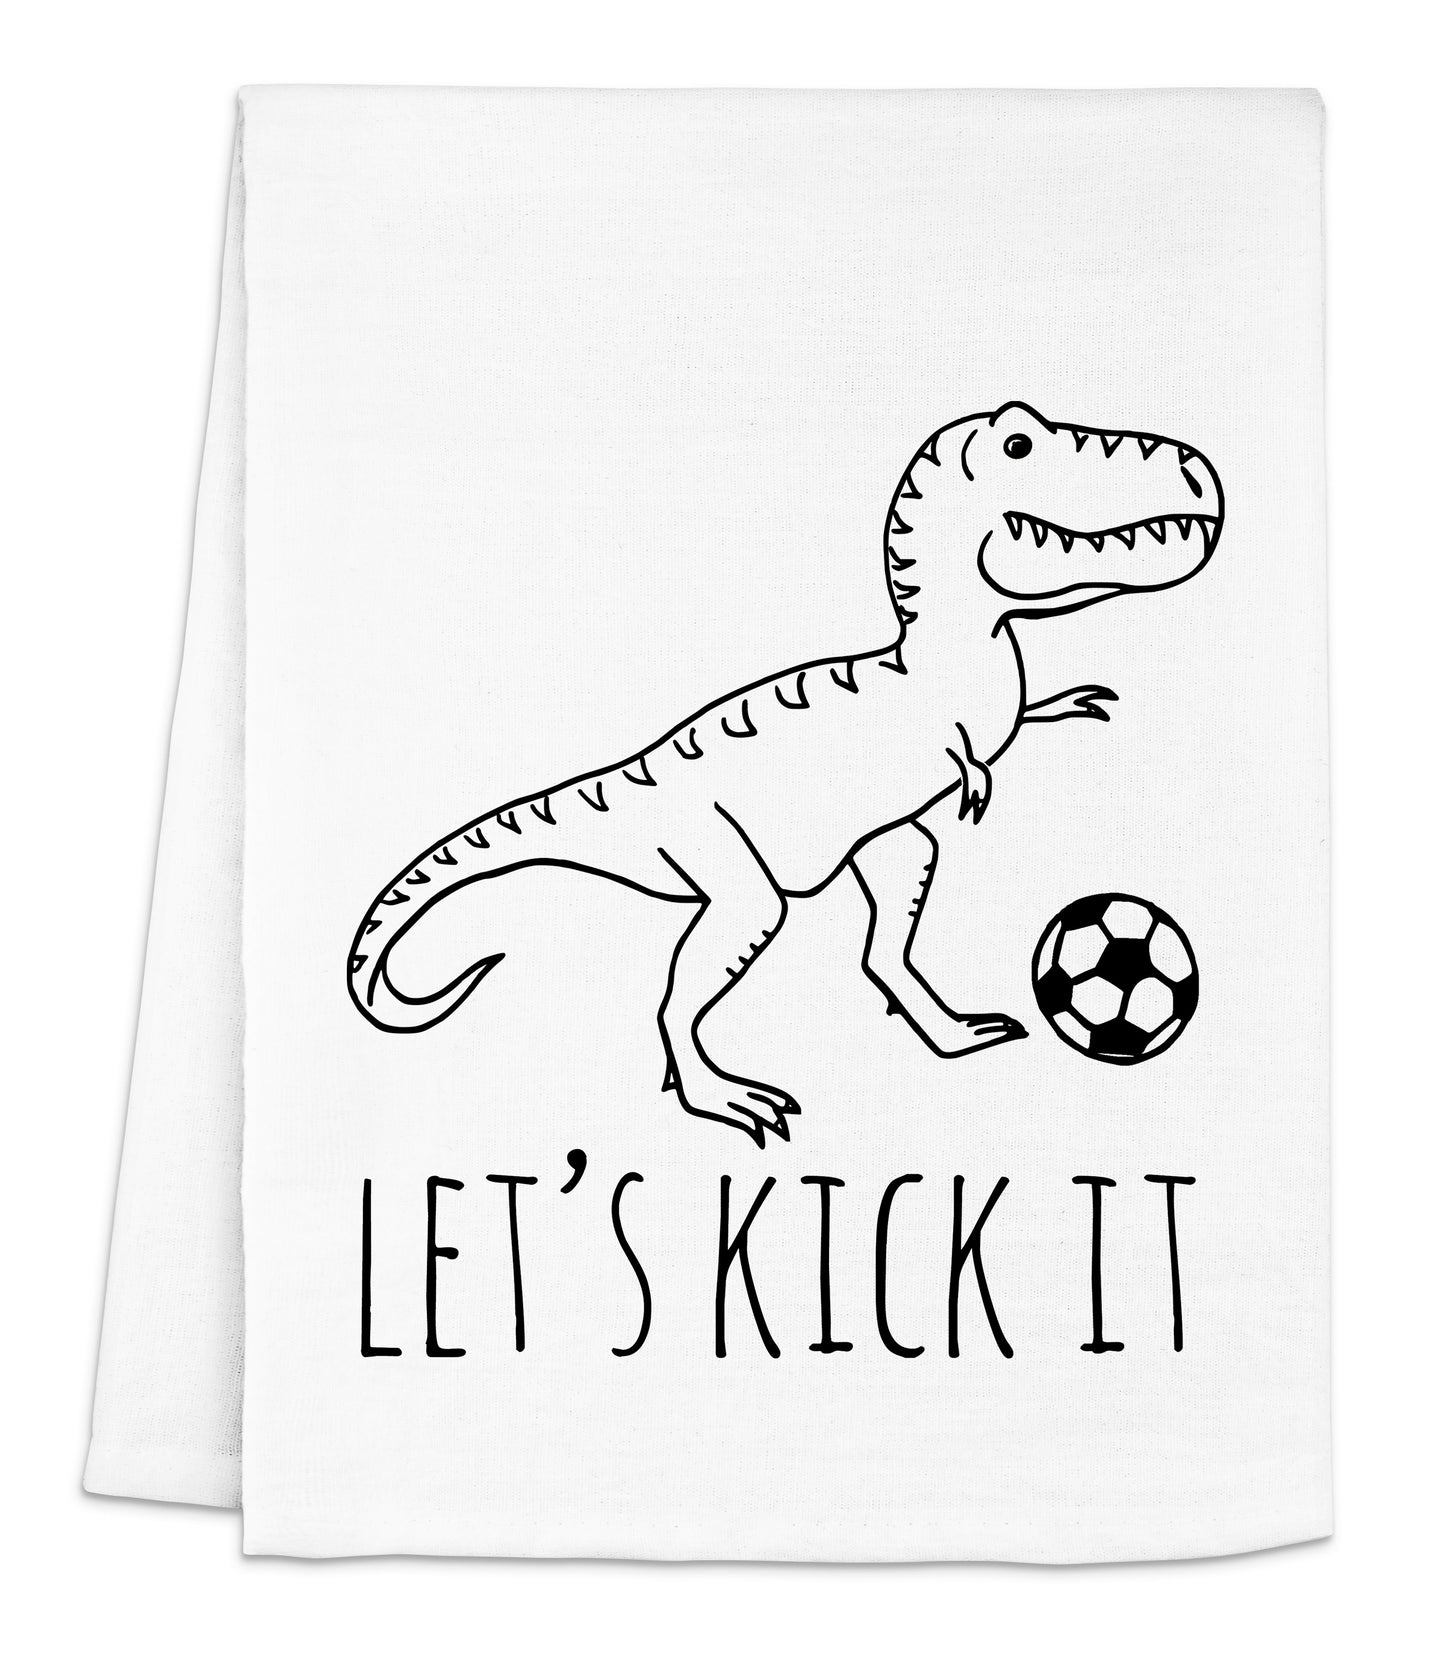 a black and white drawing of a dinosaur kicking a soccer ball